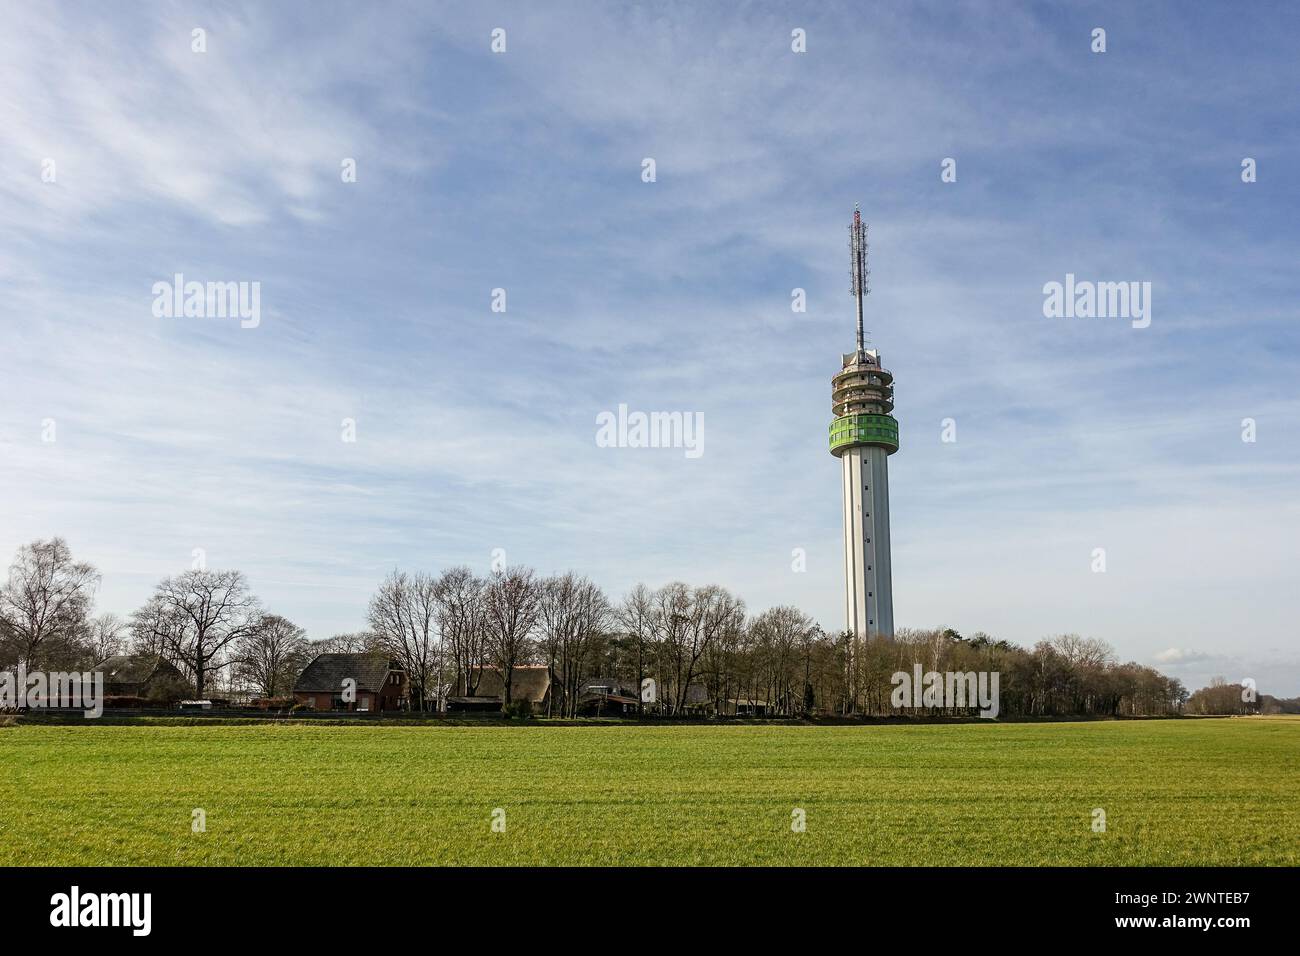 A telecommunications tower (Zendmast Markelo, tallest building in Overijssel) with antennas and dishes against a clear blue sky, surrounded by trees. Stock Photo